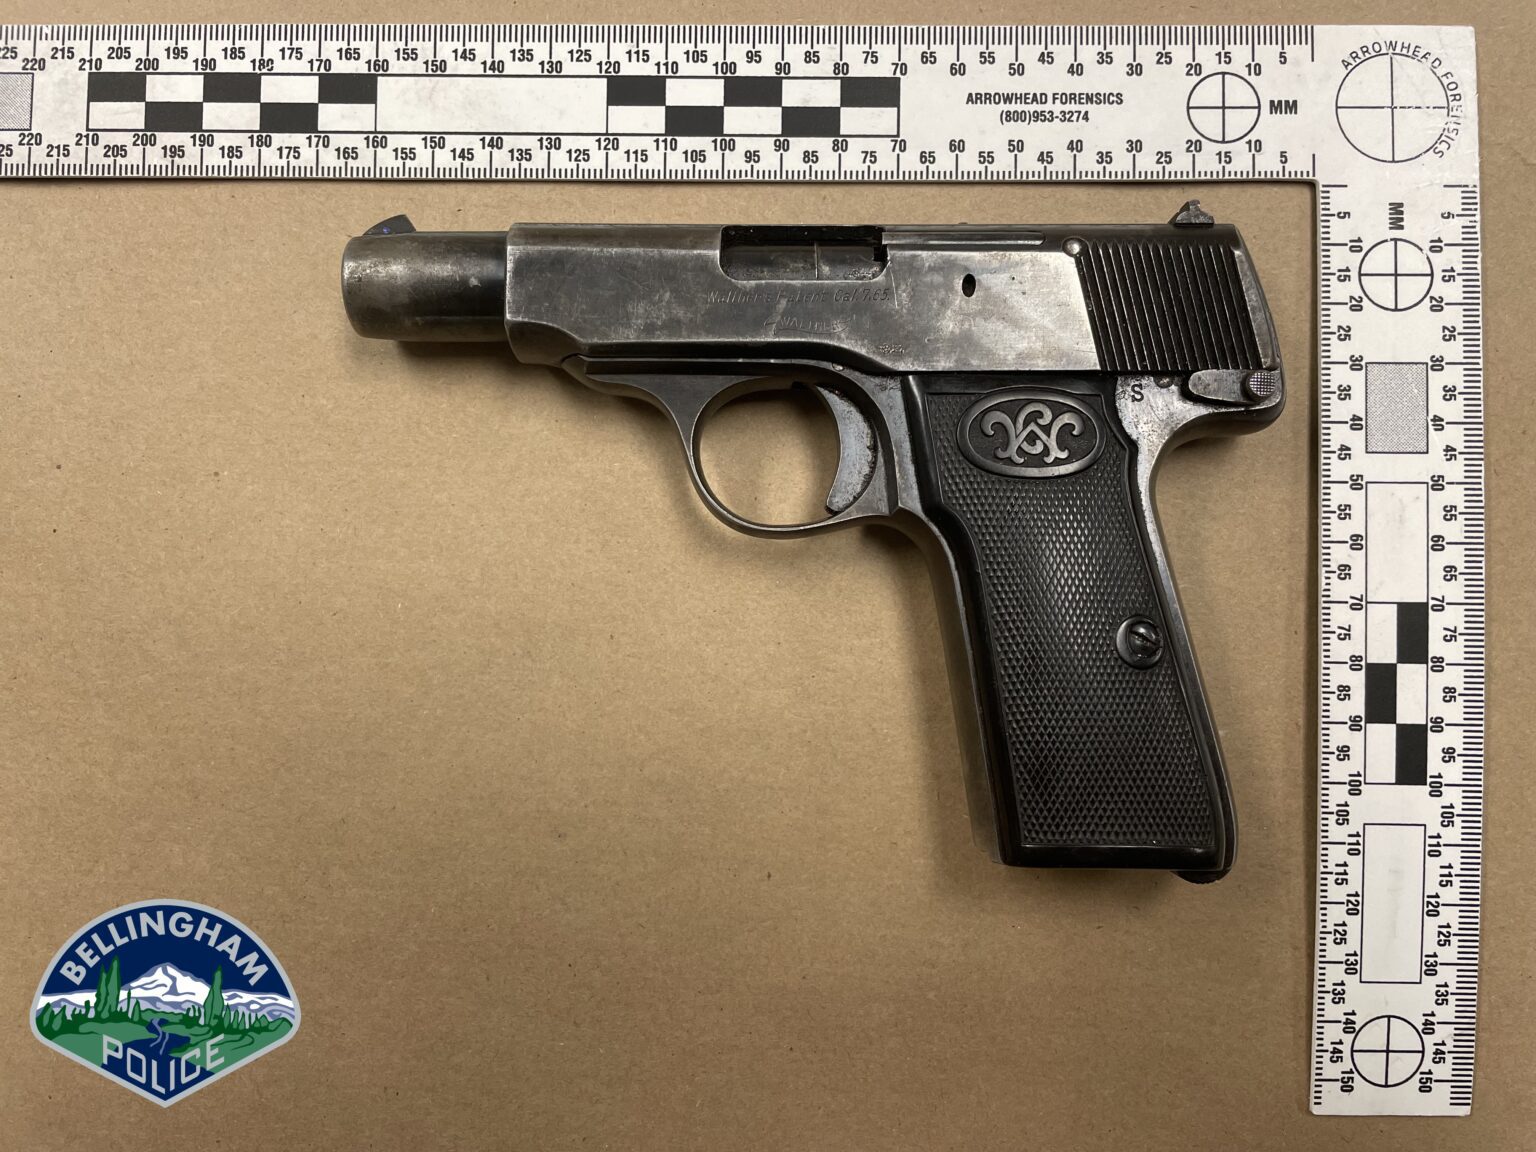 Bellingham Police Department allegedly found a handgun during the search of Daniel J. Faix's truck on Oct. 19. Faix had two outstanding warrants and was not permitted to carry a gun.